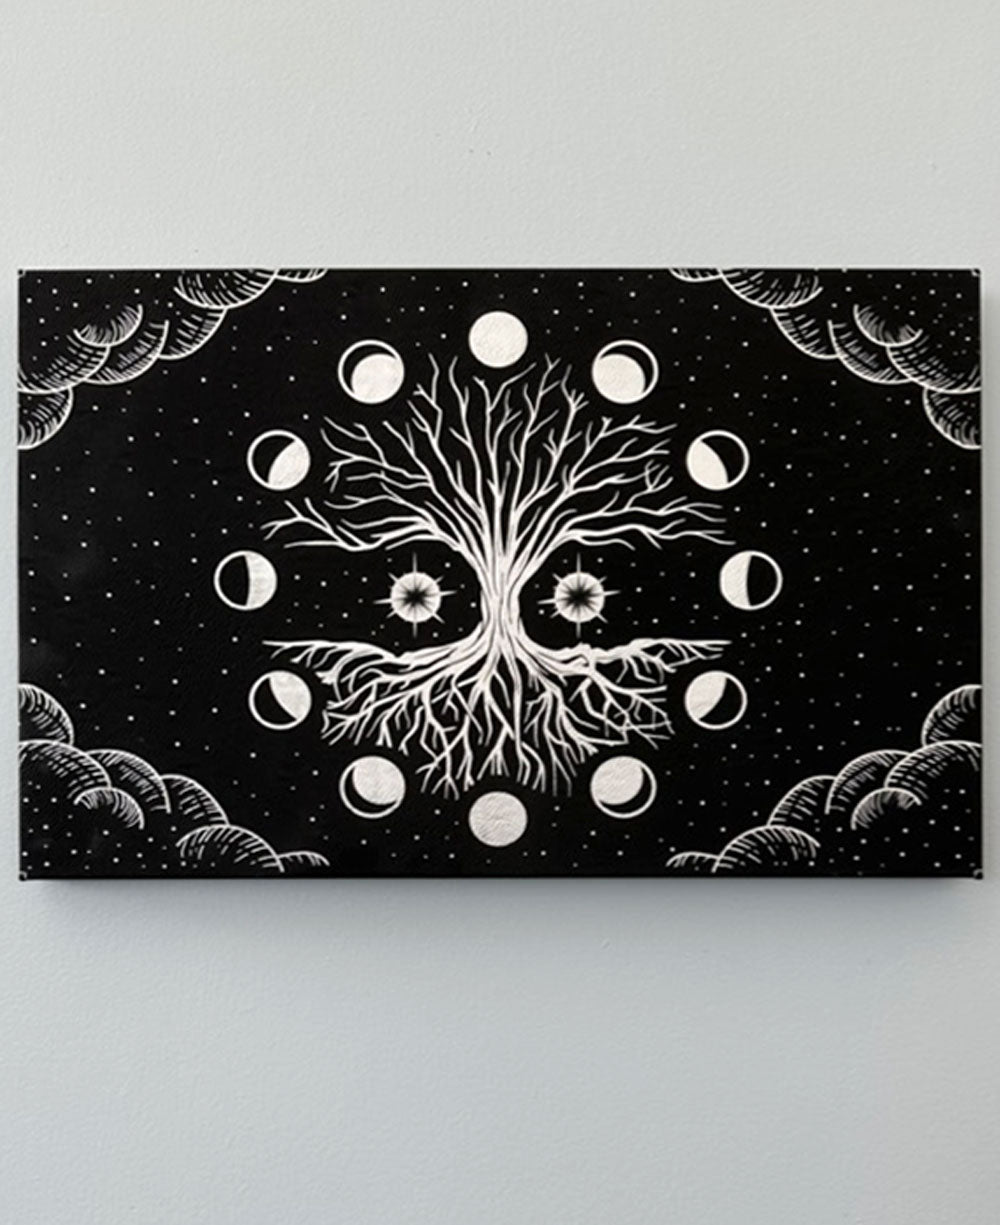 Black Leatherette Tree of Life & Moon Phases Wall Hanging – A Symbol of Our Journey and Interconnectedness - Posters, Prints, & Visual Artwork